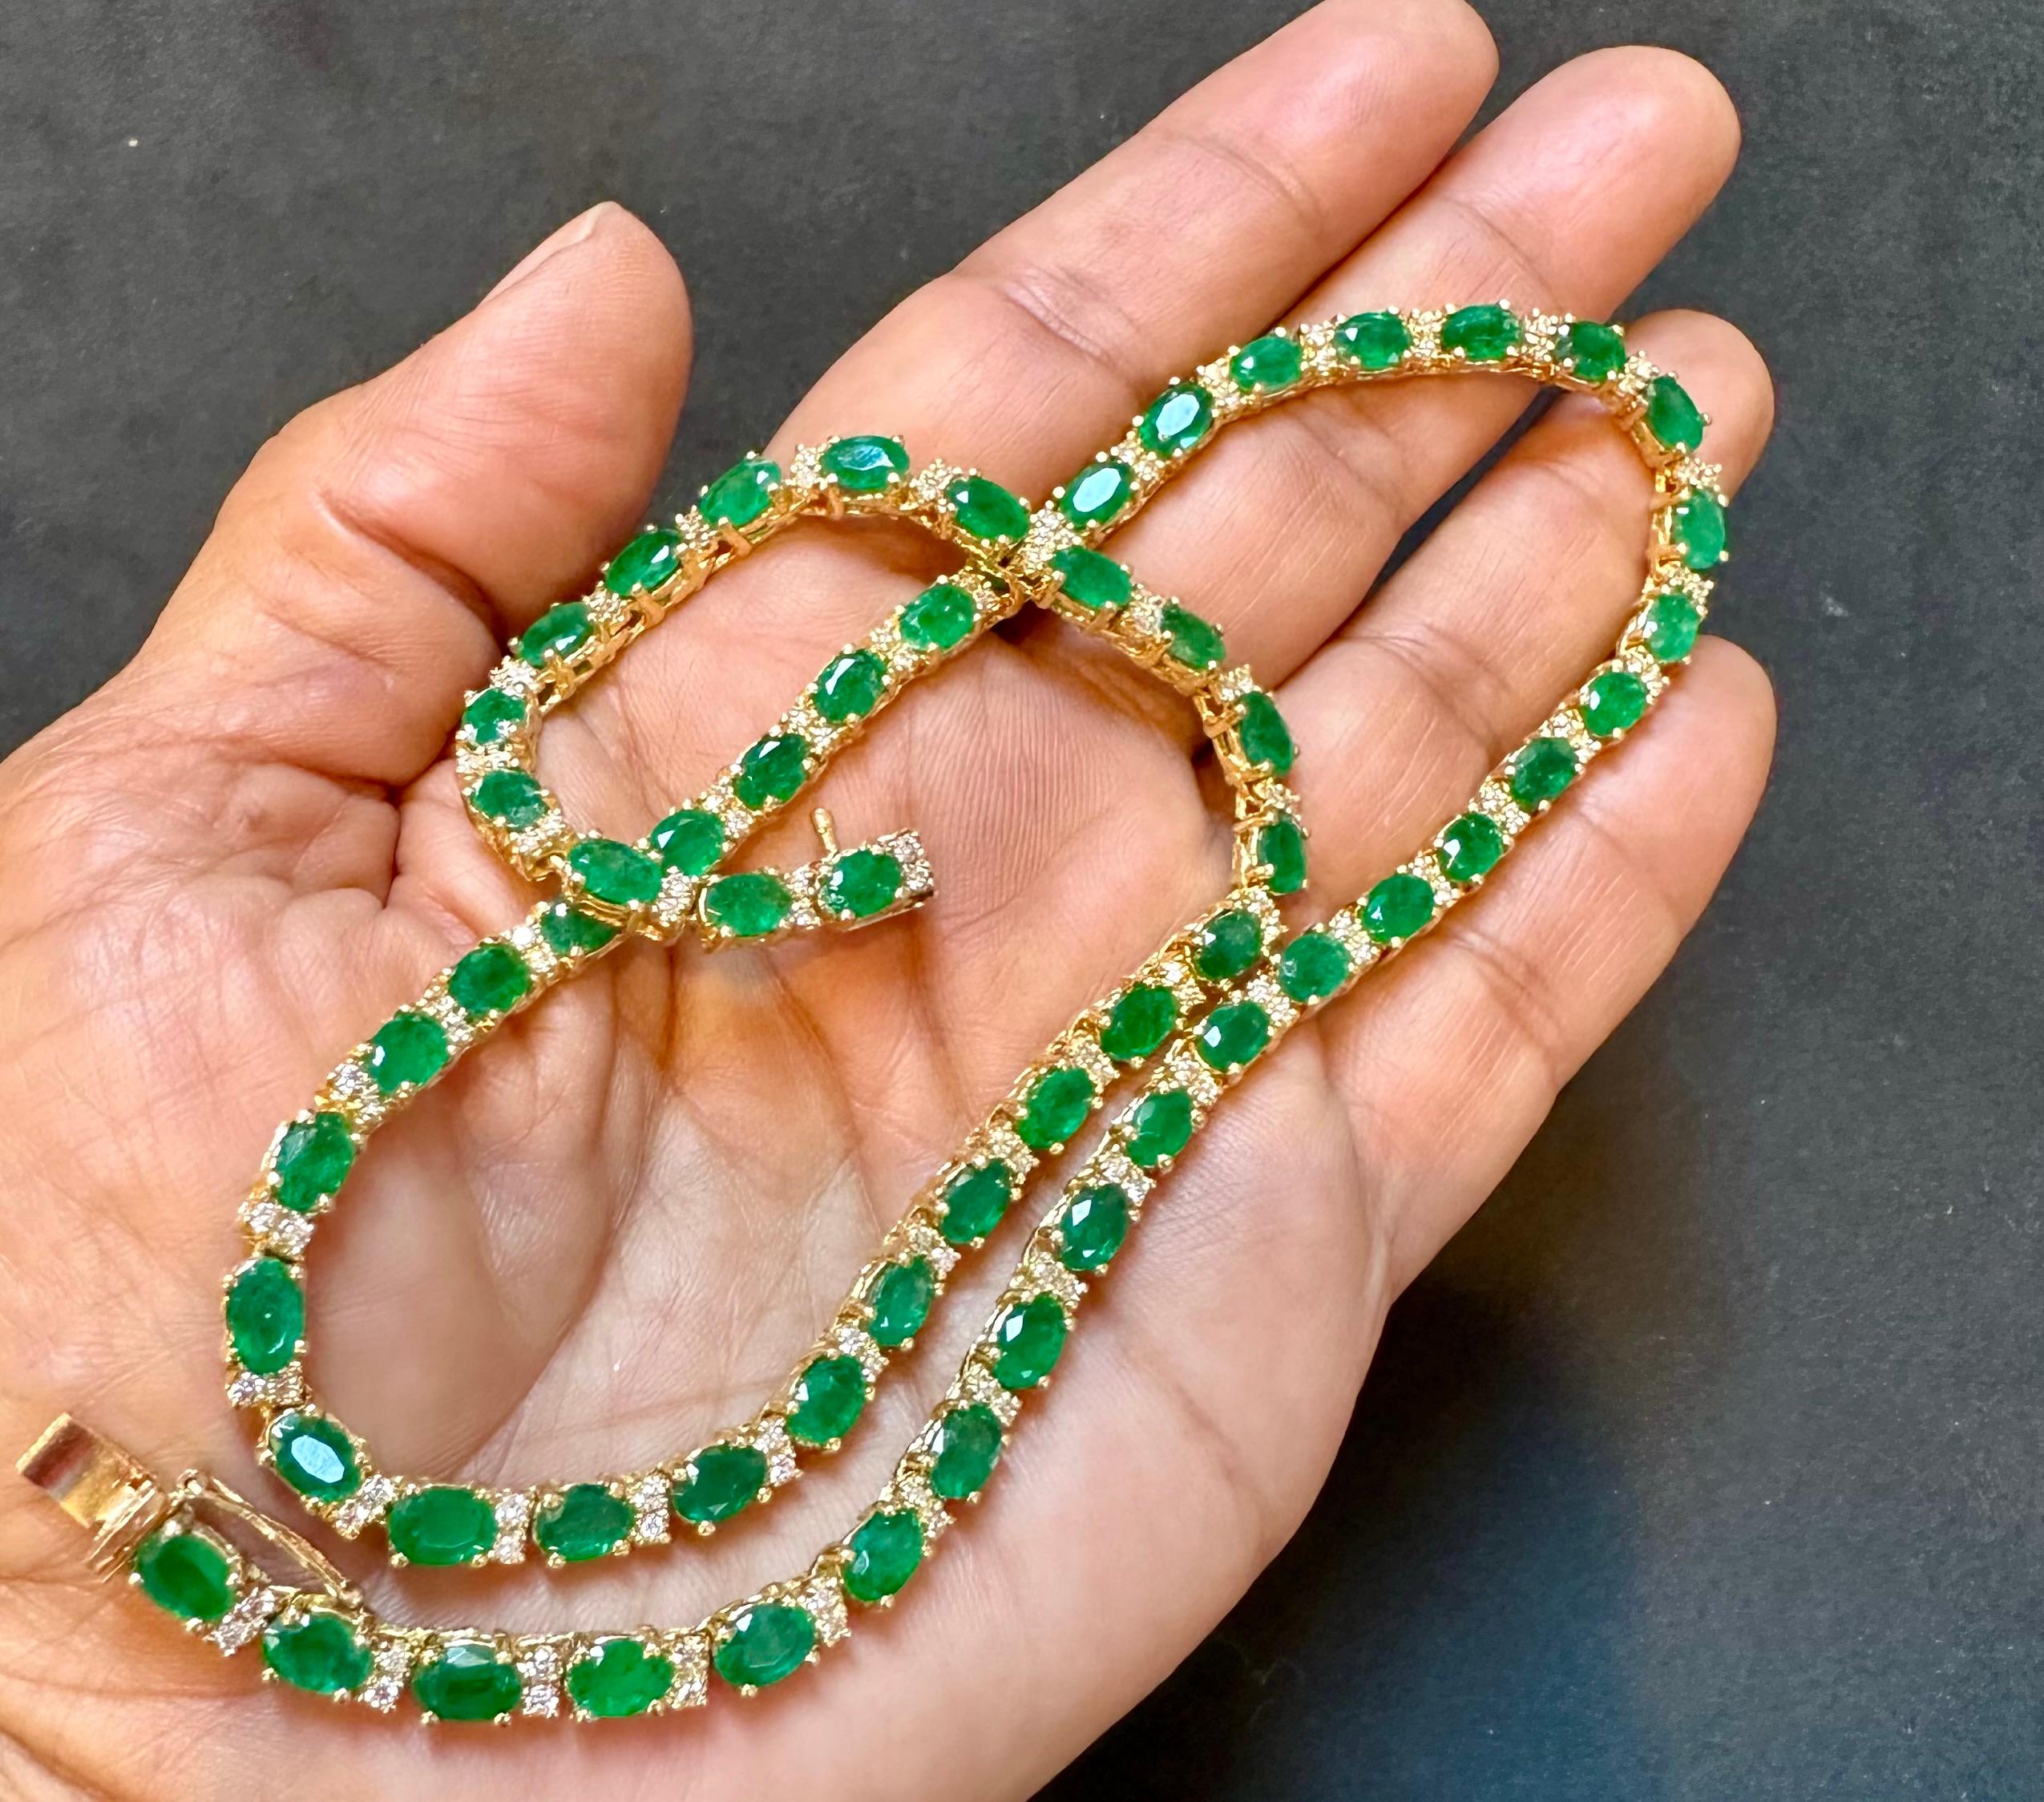 30 Carat Oval Brazilian Emerald & 3 Carat Diamond Tennis Necklace 14 Karat Gold In Excellent Condition For Sale In New York, NY